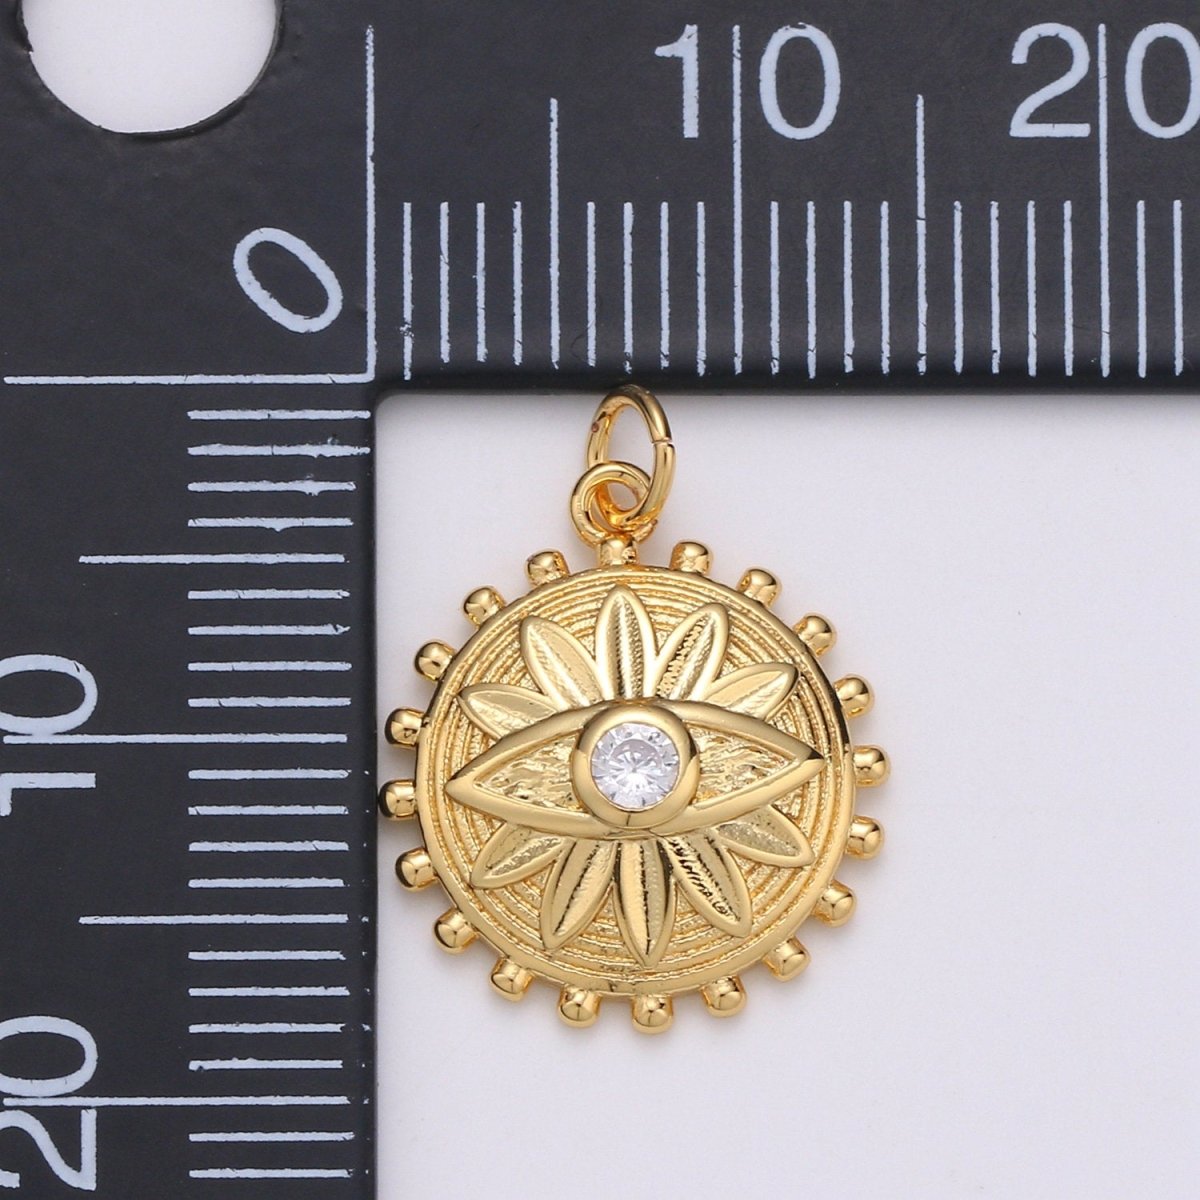 Dainty Gold Medallion Charm, 14K Gold Filled Evil Eye Charm, Cubic Zirconia Amulet Charm, Round Disc Jewelry, Micro Pave Lotus Bohemian Charm | C-514 - DLUXCA